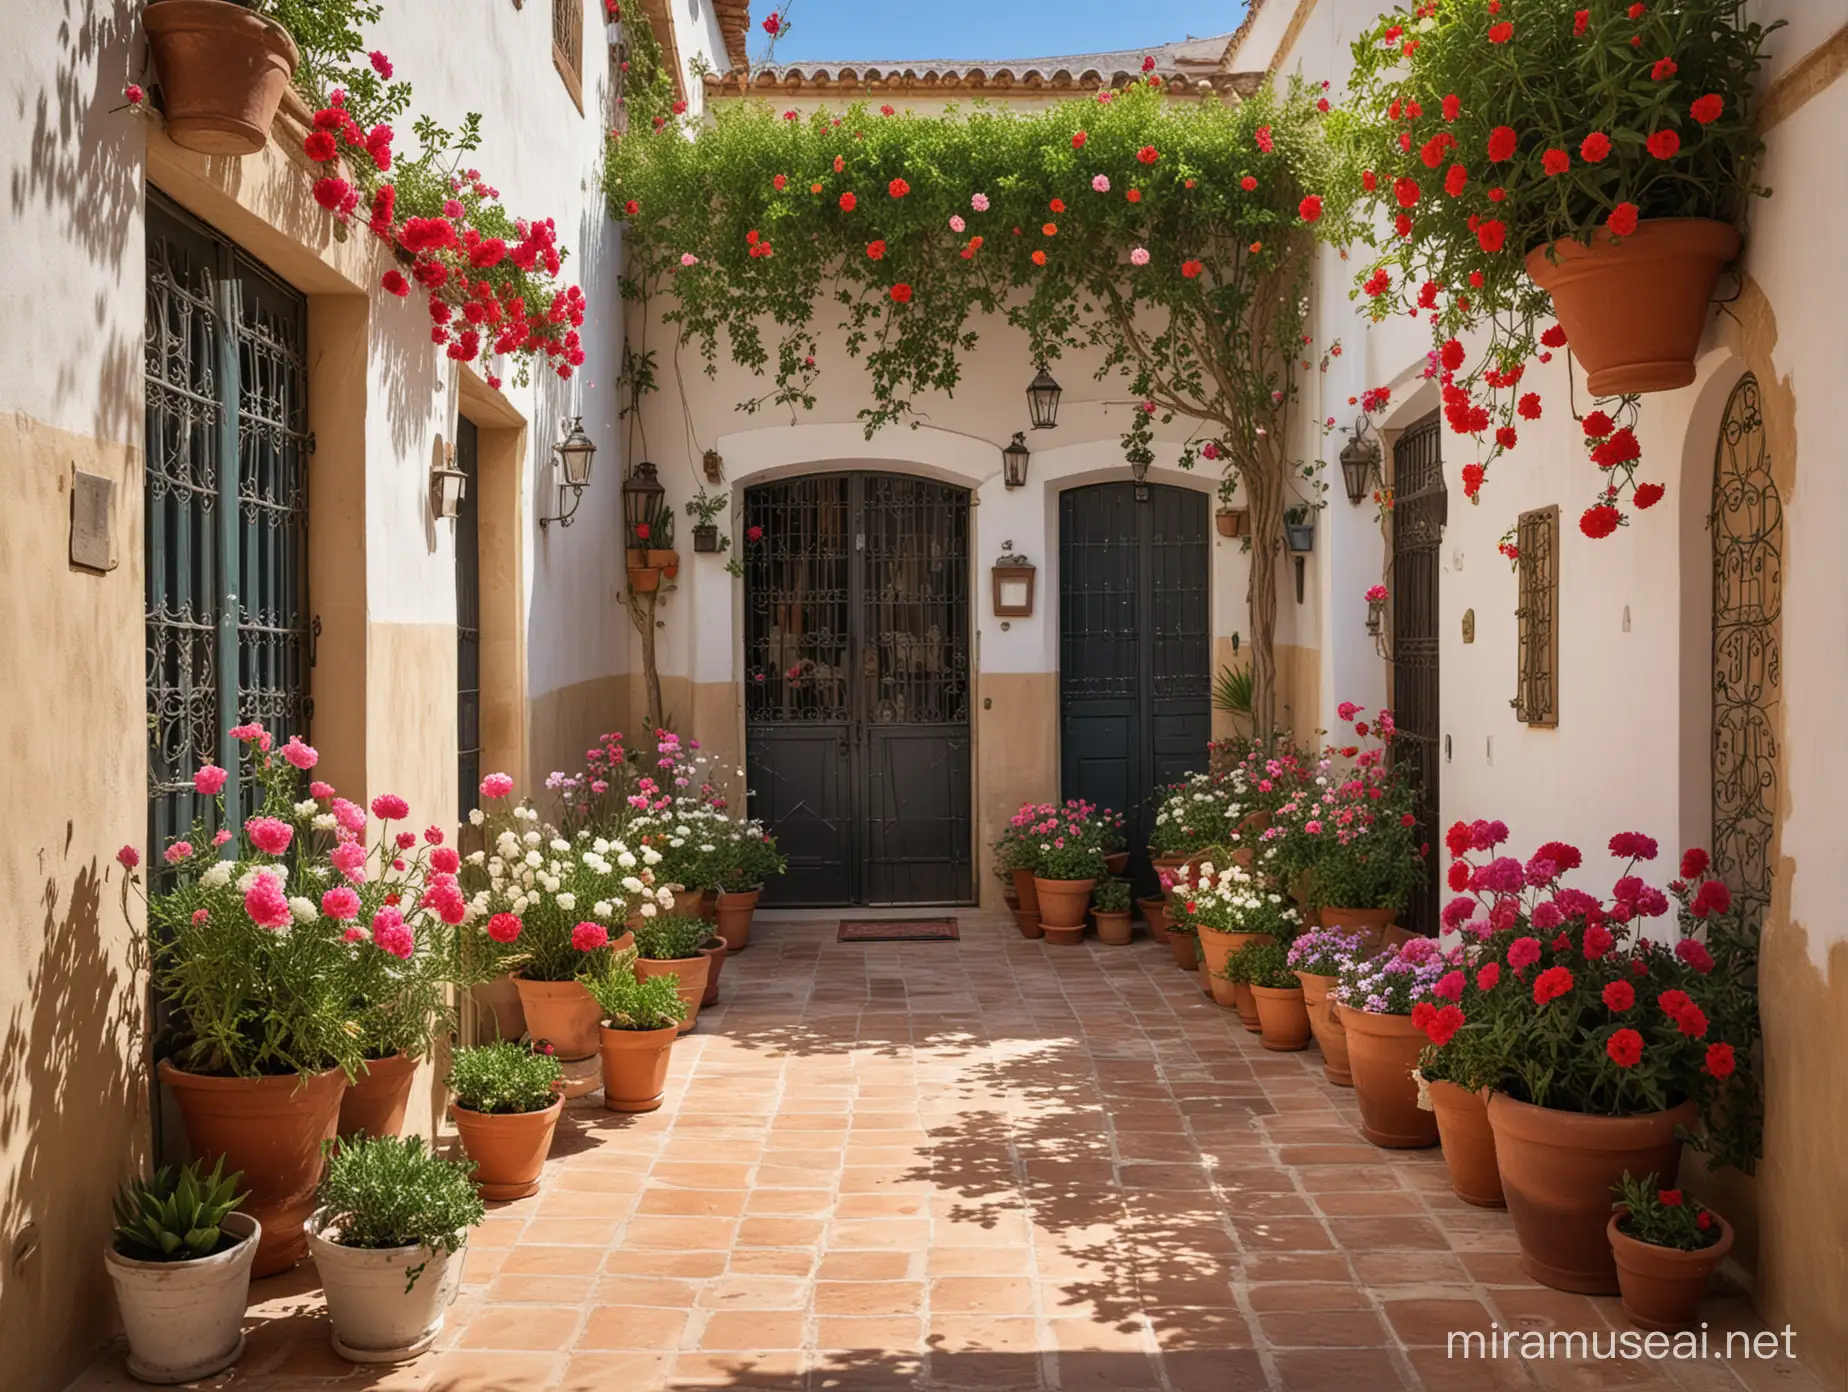 Vibrant Andalusian Courtyard Bursting with Flowerpots and Blossoms